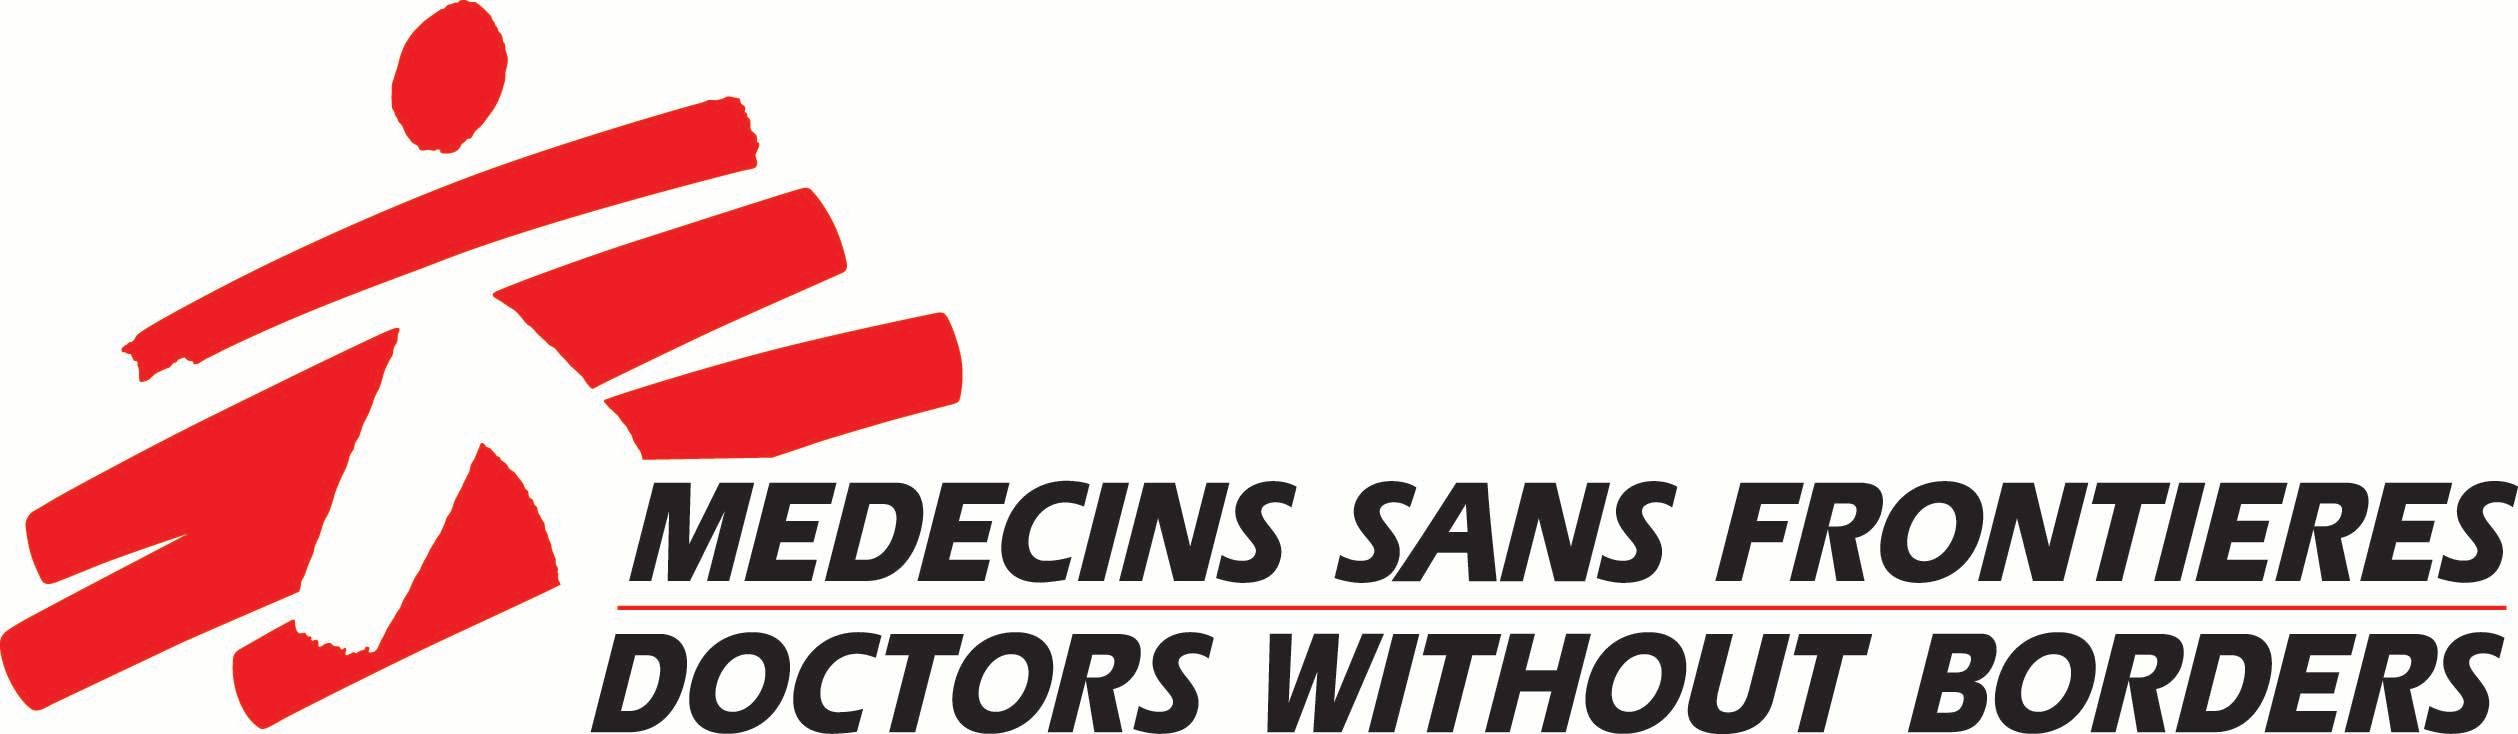 MSF UK Doctors Without Borders